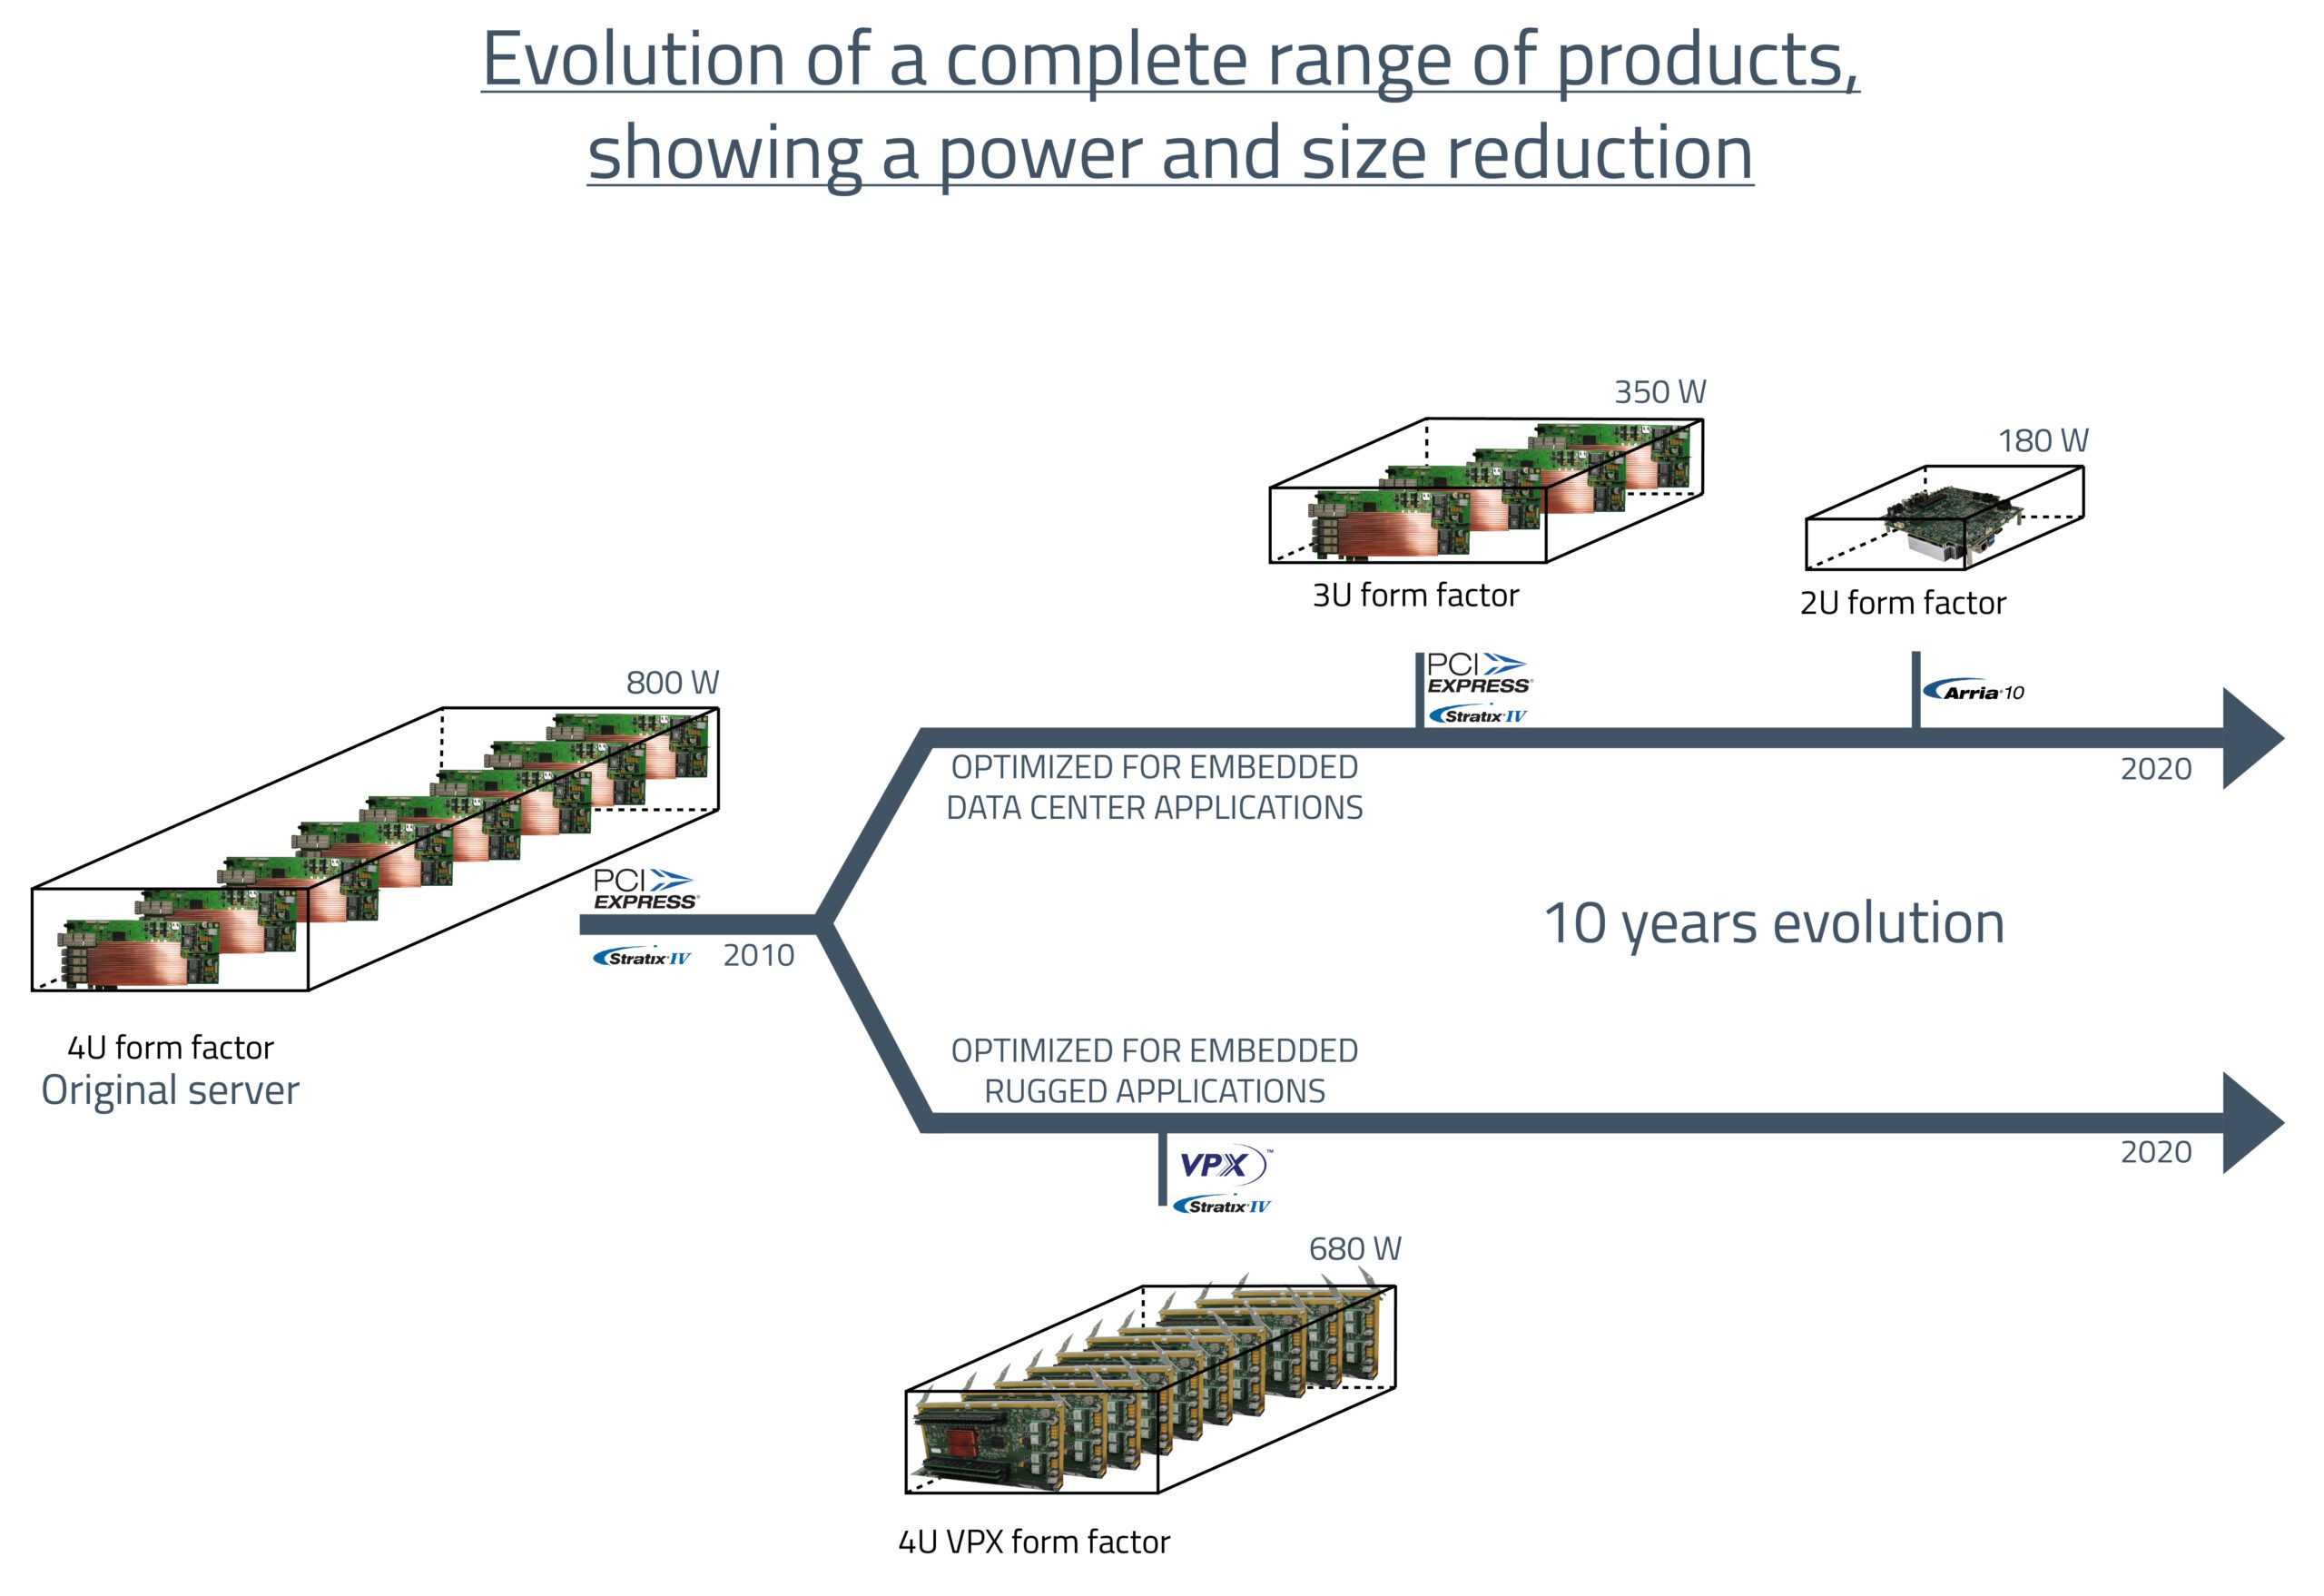 evolution of a complete reflex ces range of products